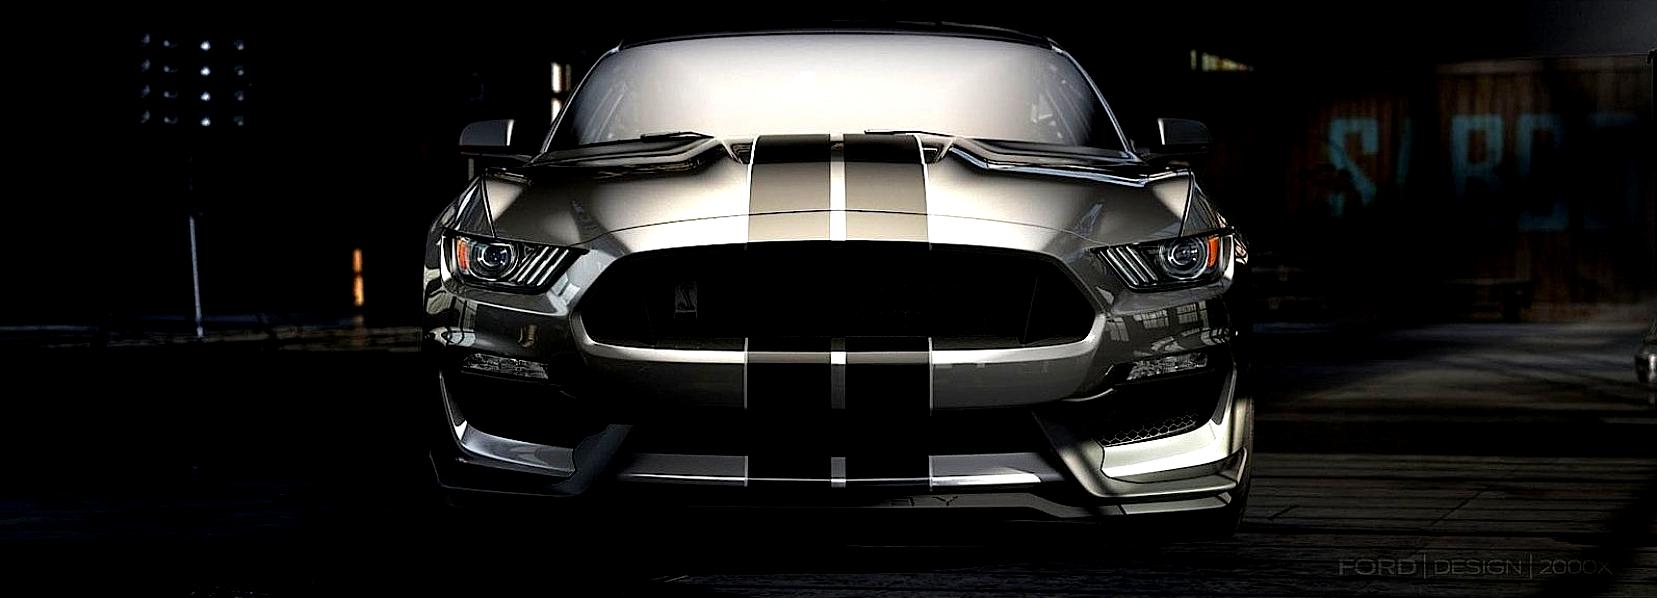 Ford Mustang Shelby GT350 2015 #27